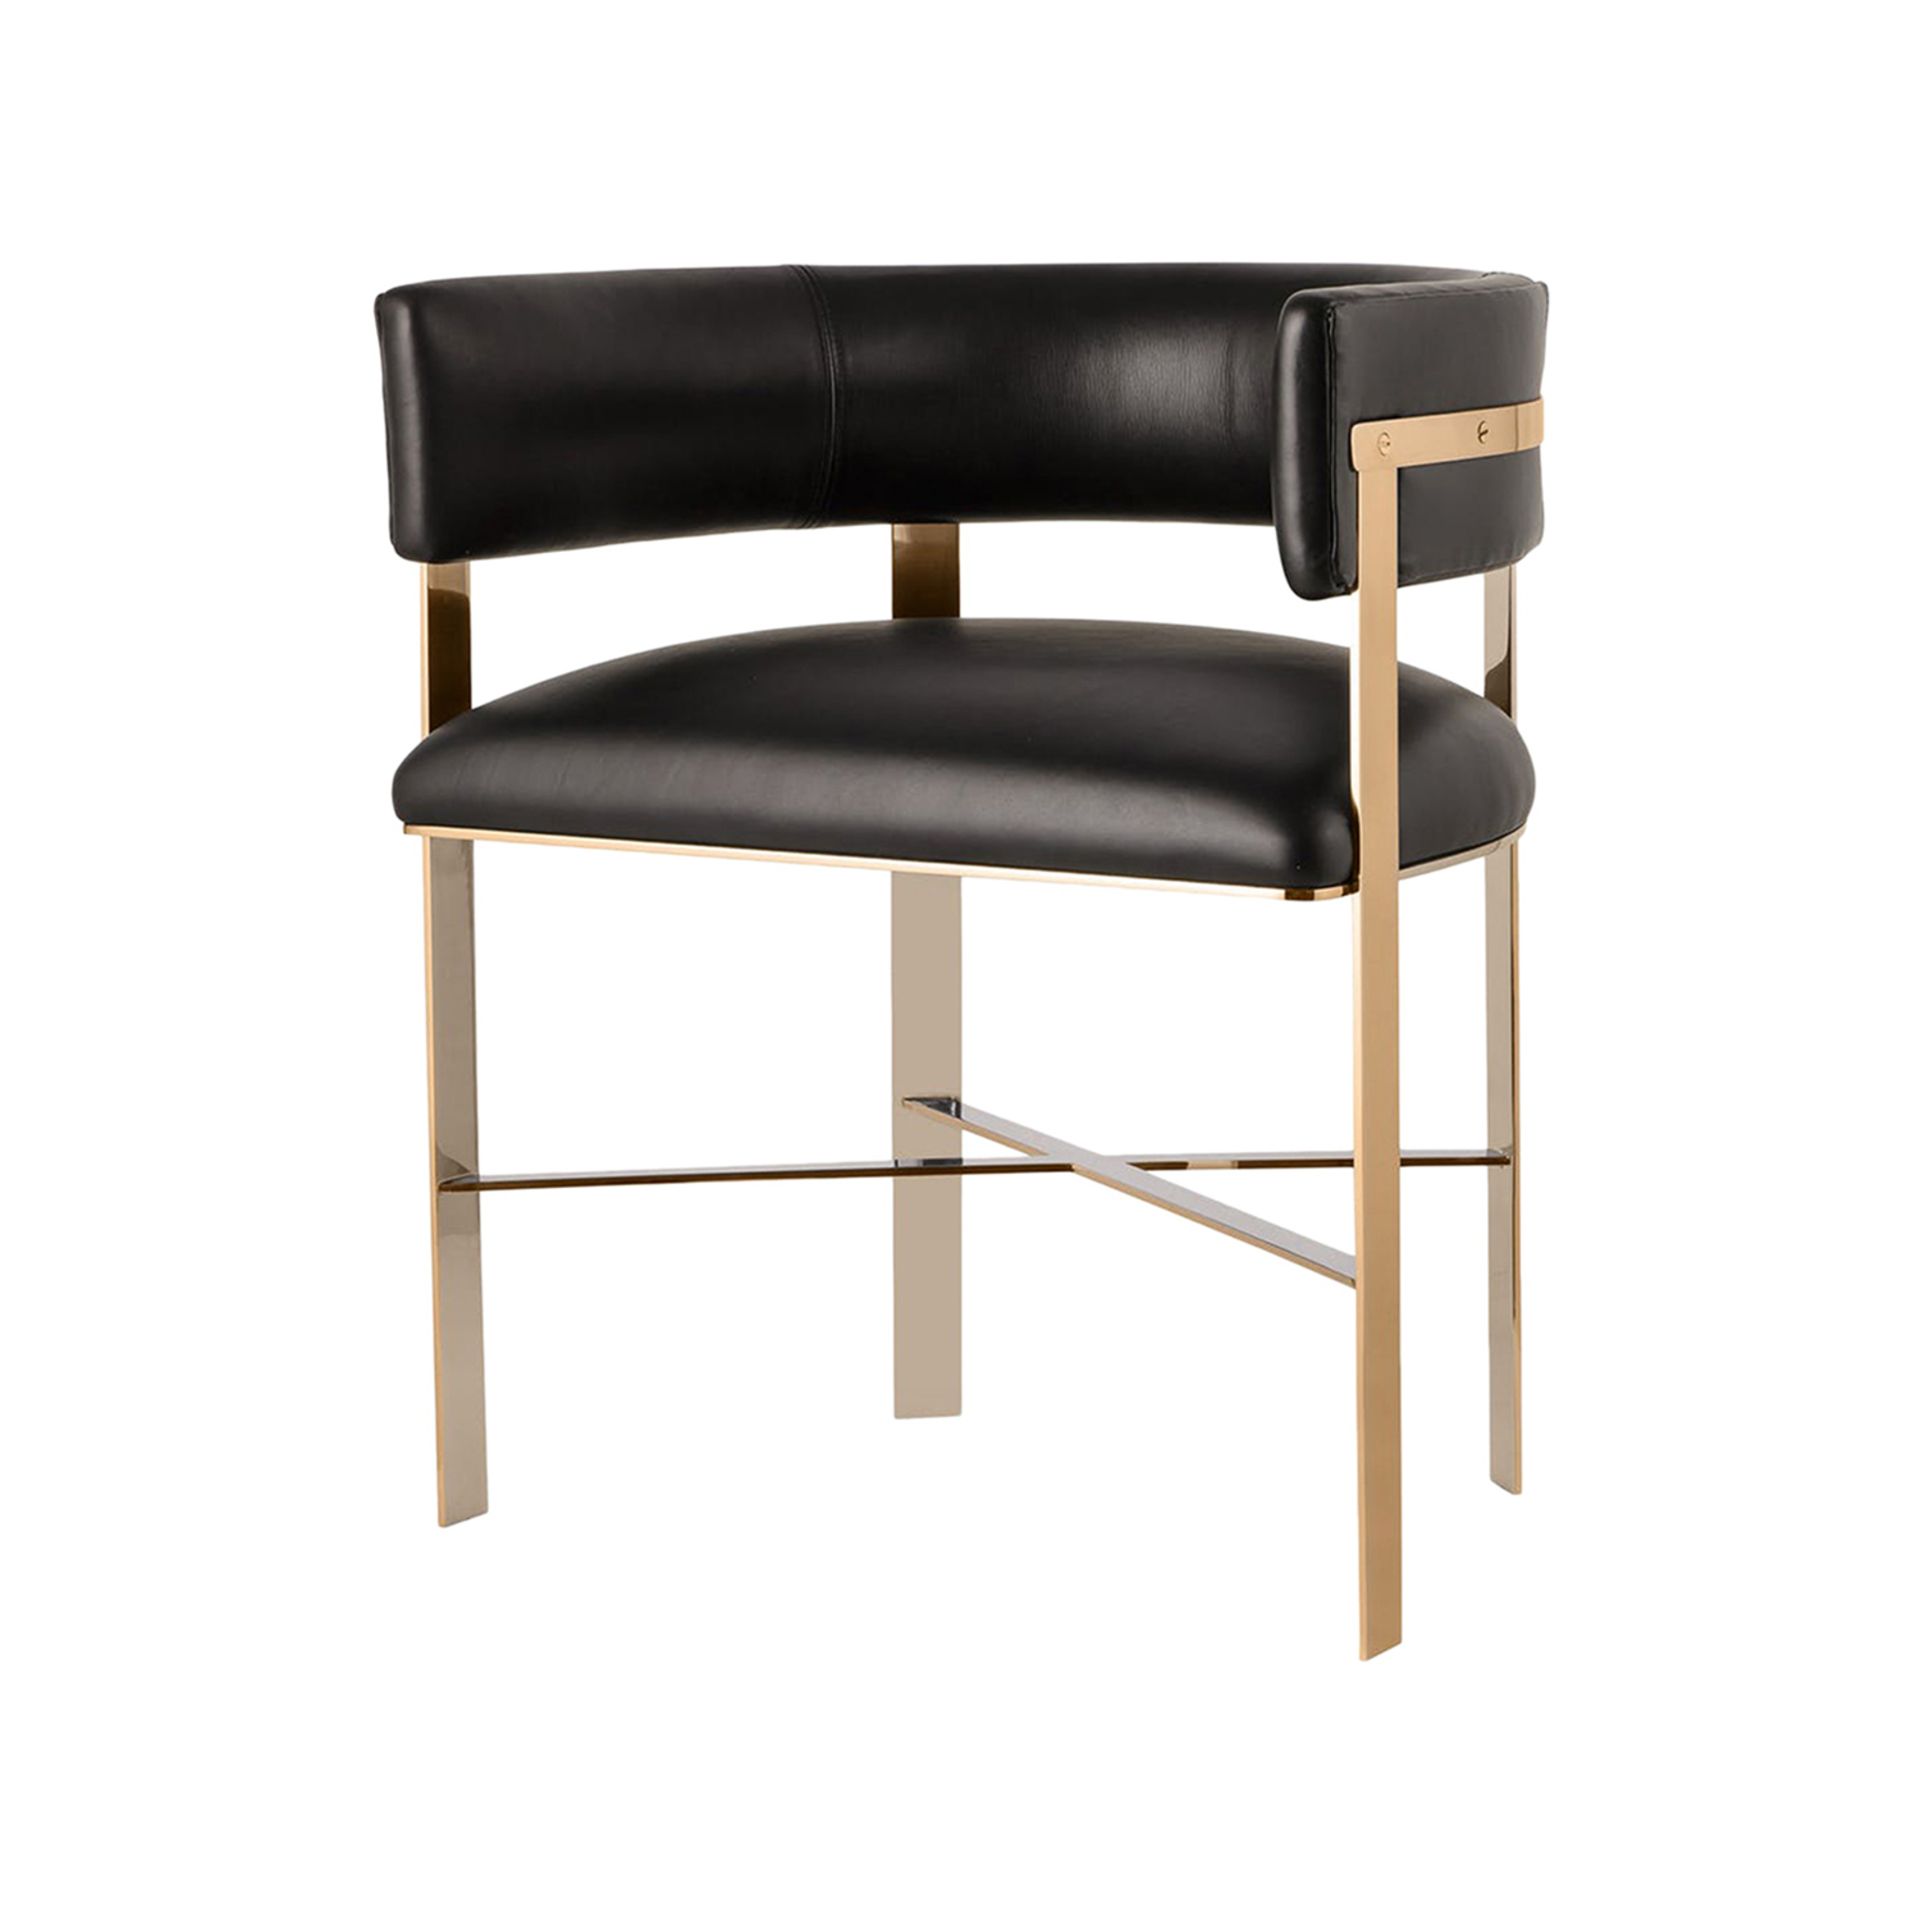 Art Dining Chair - Mirrored Brass / Black Onyx Leather The Art Dining Chair Incorporates Aspects - Image 2 of 2